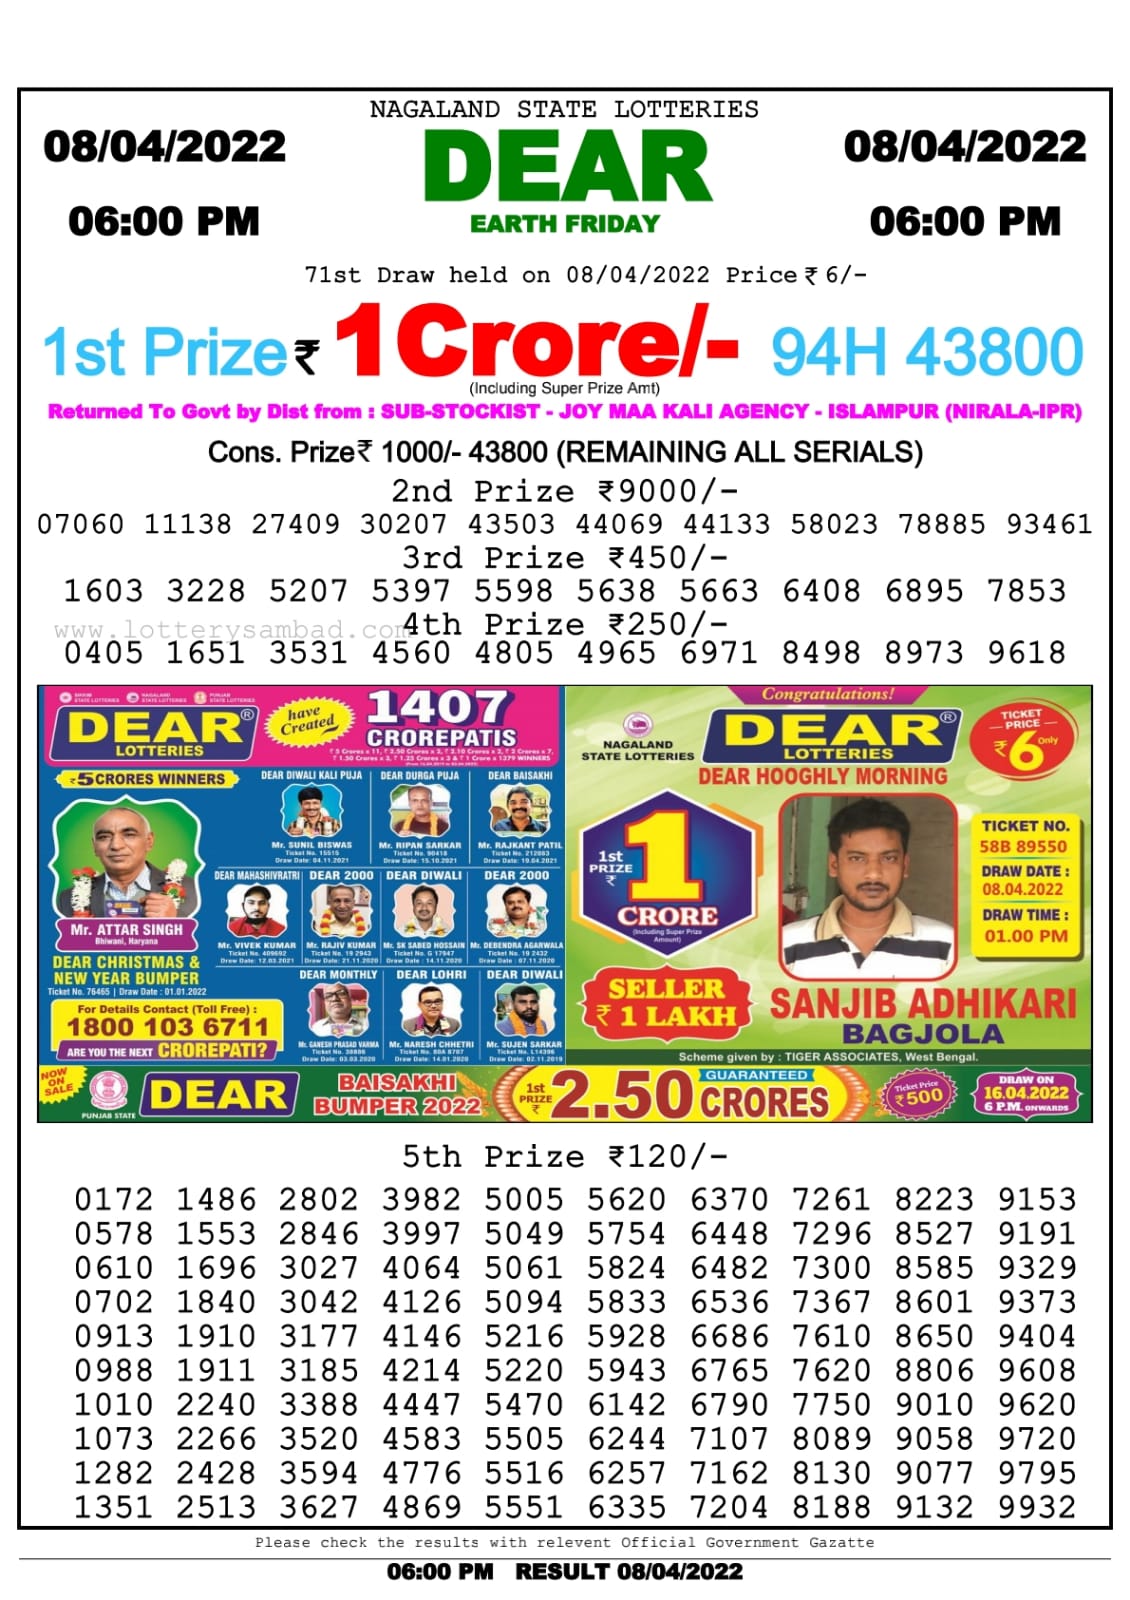 Dear Lottery Nagaland state Lottery Results 06.00 pm 08.04.2022